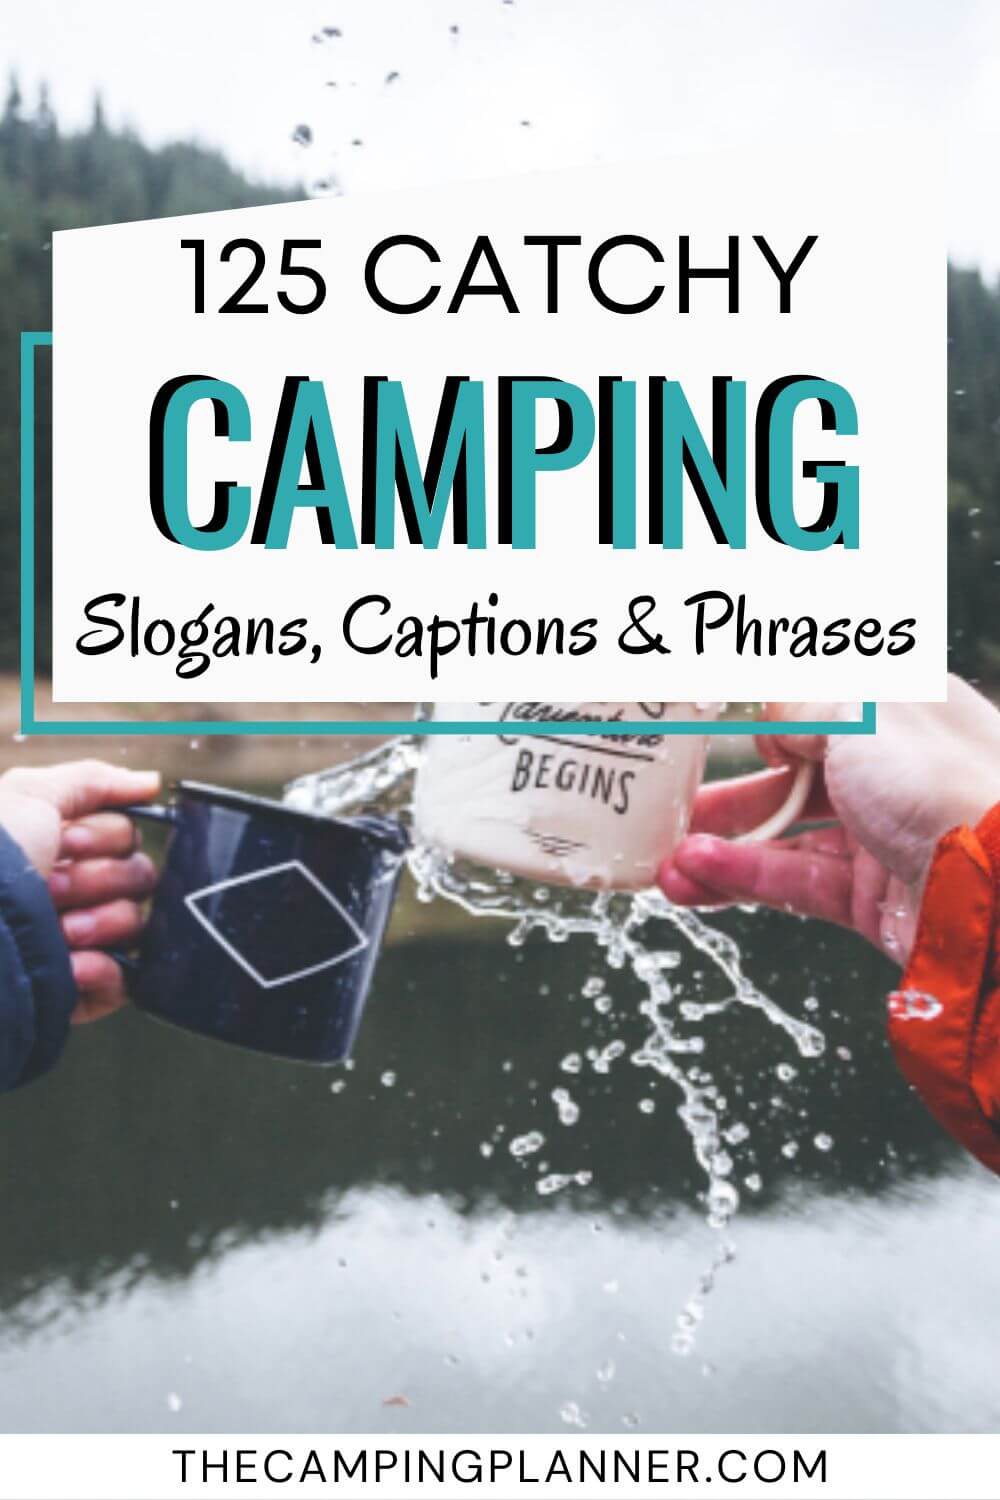 catchy camping slogans, camping captions and camping phrases.